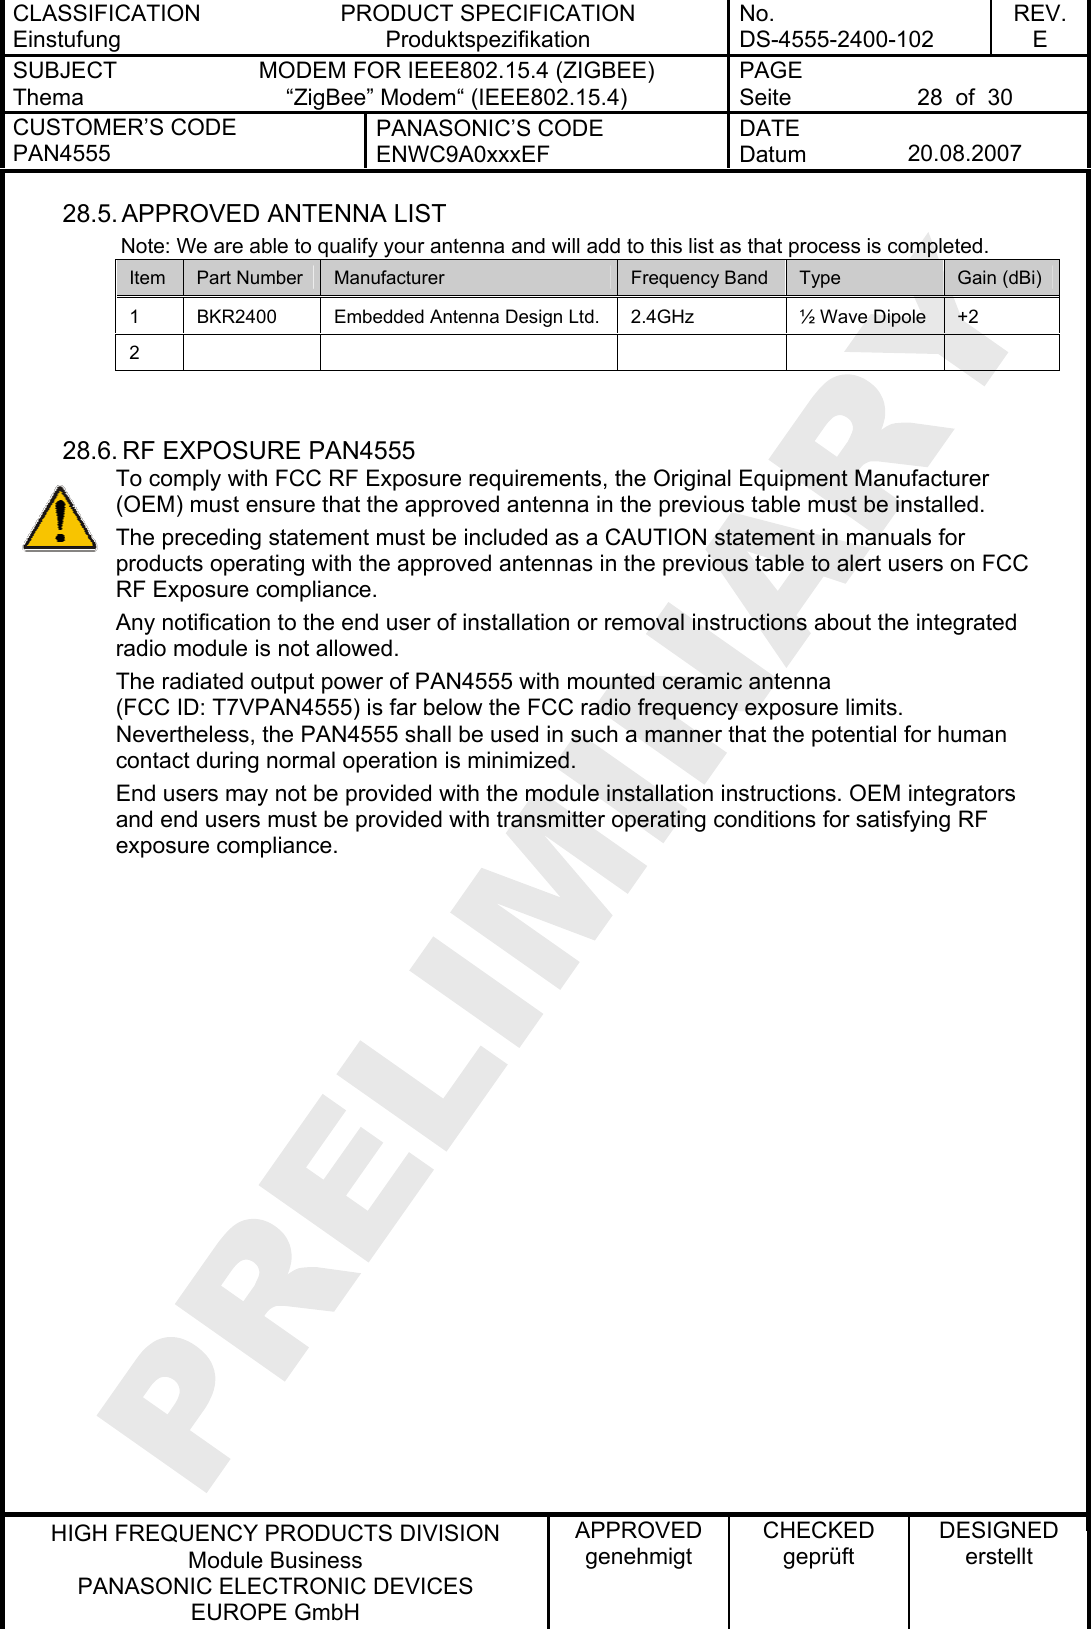 CLASSIFICATION Einstufung PRODUCT SPECIFICATION Produktspezifikation No. DS-4555-2400-102 REV. E SUBJECT Thema MODEM FOR IEEE802.15.4 (ZIGBEE) “ZigBee” Modem“ (IEEE802.15.4) PAGE Seite  28  of  30 CUSTOMER’S CODE PAN4555 PANASONIC’S CODE ENWC9A0xxxEF DATE Datum  20.08.2007   HIGH FREQUENCY PRODUCTS DIVISION Module Business PANASONIC ELECTRONIC DEVICES  EUROPE GmbH APPROVED genehmigt CHECKED geprüft DESIGNED erstellt 28.5. APPROVED  ANTENNA LIST          Note: We are able to qualify your antenna and will add to this list as that process is completed. Item  Part Number  Manufacturer  Frequency Band  Type  Gain (dBi) 1  BKR2400  Embedded Antenna Design Ltd.  2.4GHz  ½ Wave Dipole  +2 2            28.6. RF EXPOSURE PAN4555 To comply with FCC RF Exposure requirements, the Original Equipment Manufacturer (OEM) must ensure that the approved antenna in the previous table must be installed. The preceding statement must be included as a CAUTION statement in manuals for products operating with the approved antennas in the previous table to alert users on FCC RF Exposure compliance. Any notification to the end user of installation or removal instructions about the integrated radio module is not allowed. The radiated output power of PAN4555 with mounted ceramic antenna (FCC ID: T7VPAN4555) is far below the FCC radio frequency exposure limits. Nevertheless, the PAN4555 shall be used in such a manner that the potential for human contact during normal operation is minimized. End users may not be provided with the module installation instructions. OEM integrators and end users must be provided with transmitter operating conditions for satisfying RF exposure compliance.   